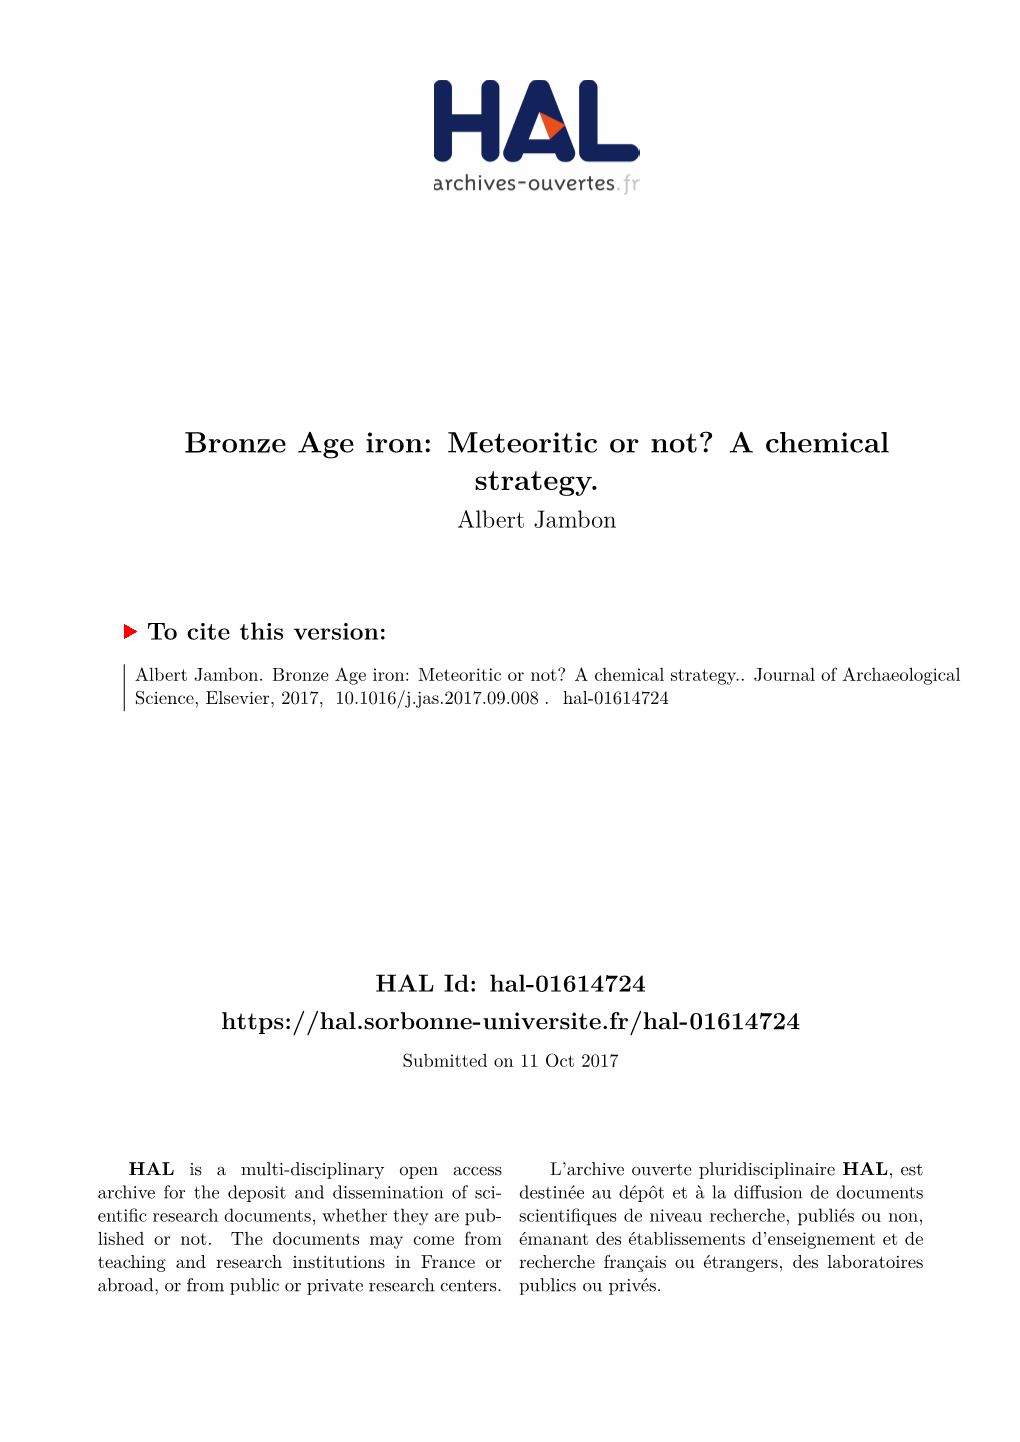 Bronze Age Iron: Meteoritic Or Not? a Chemical Strategy. Albert Jambon